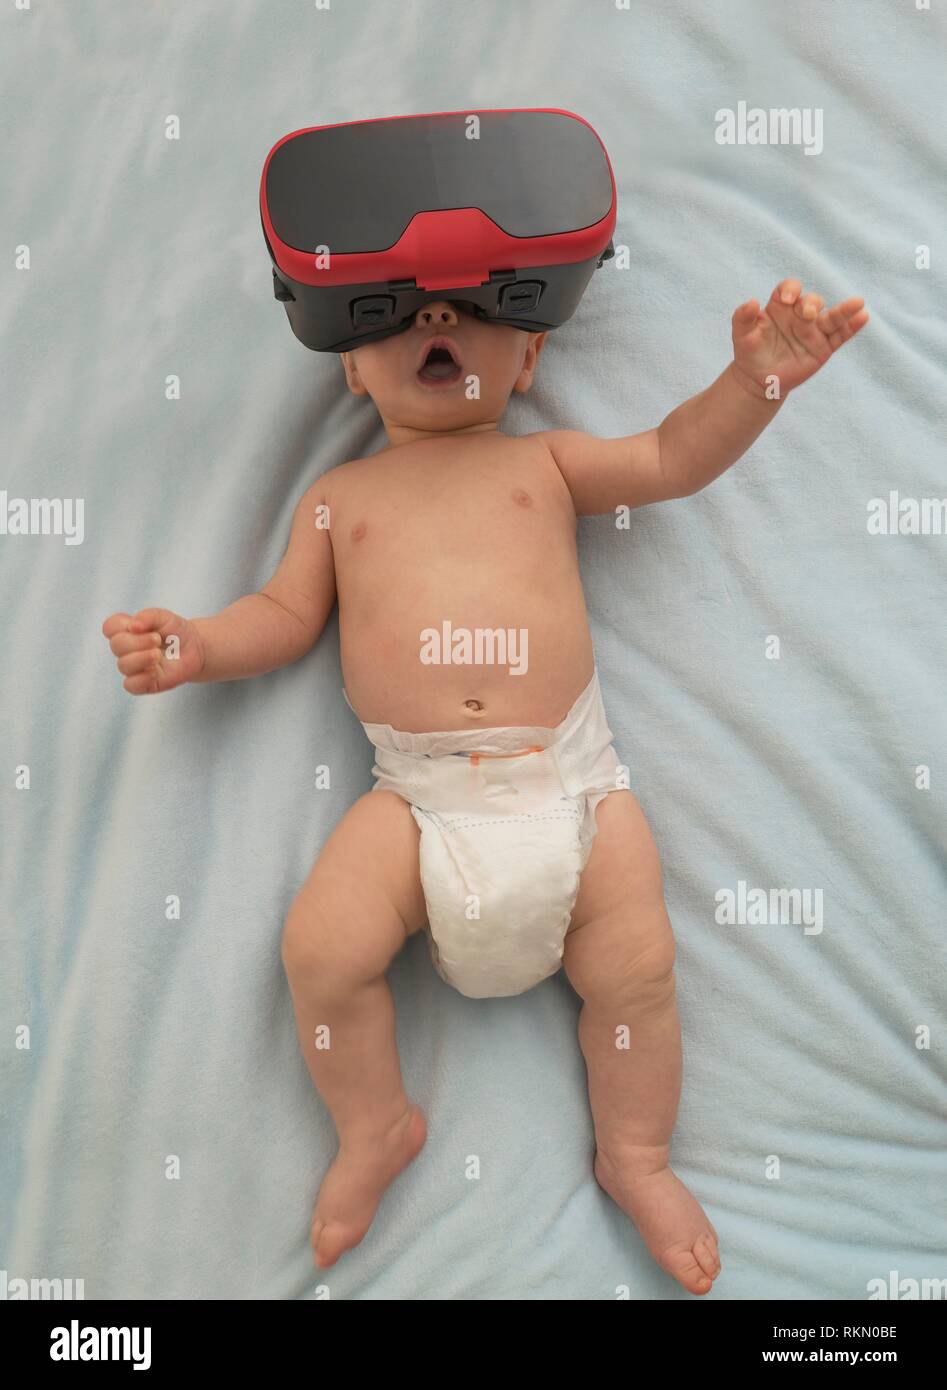 4 months old baby wearing googles Stock Photo